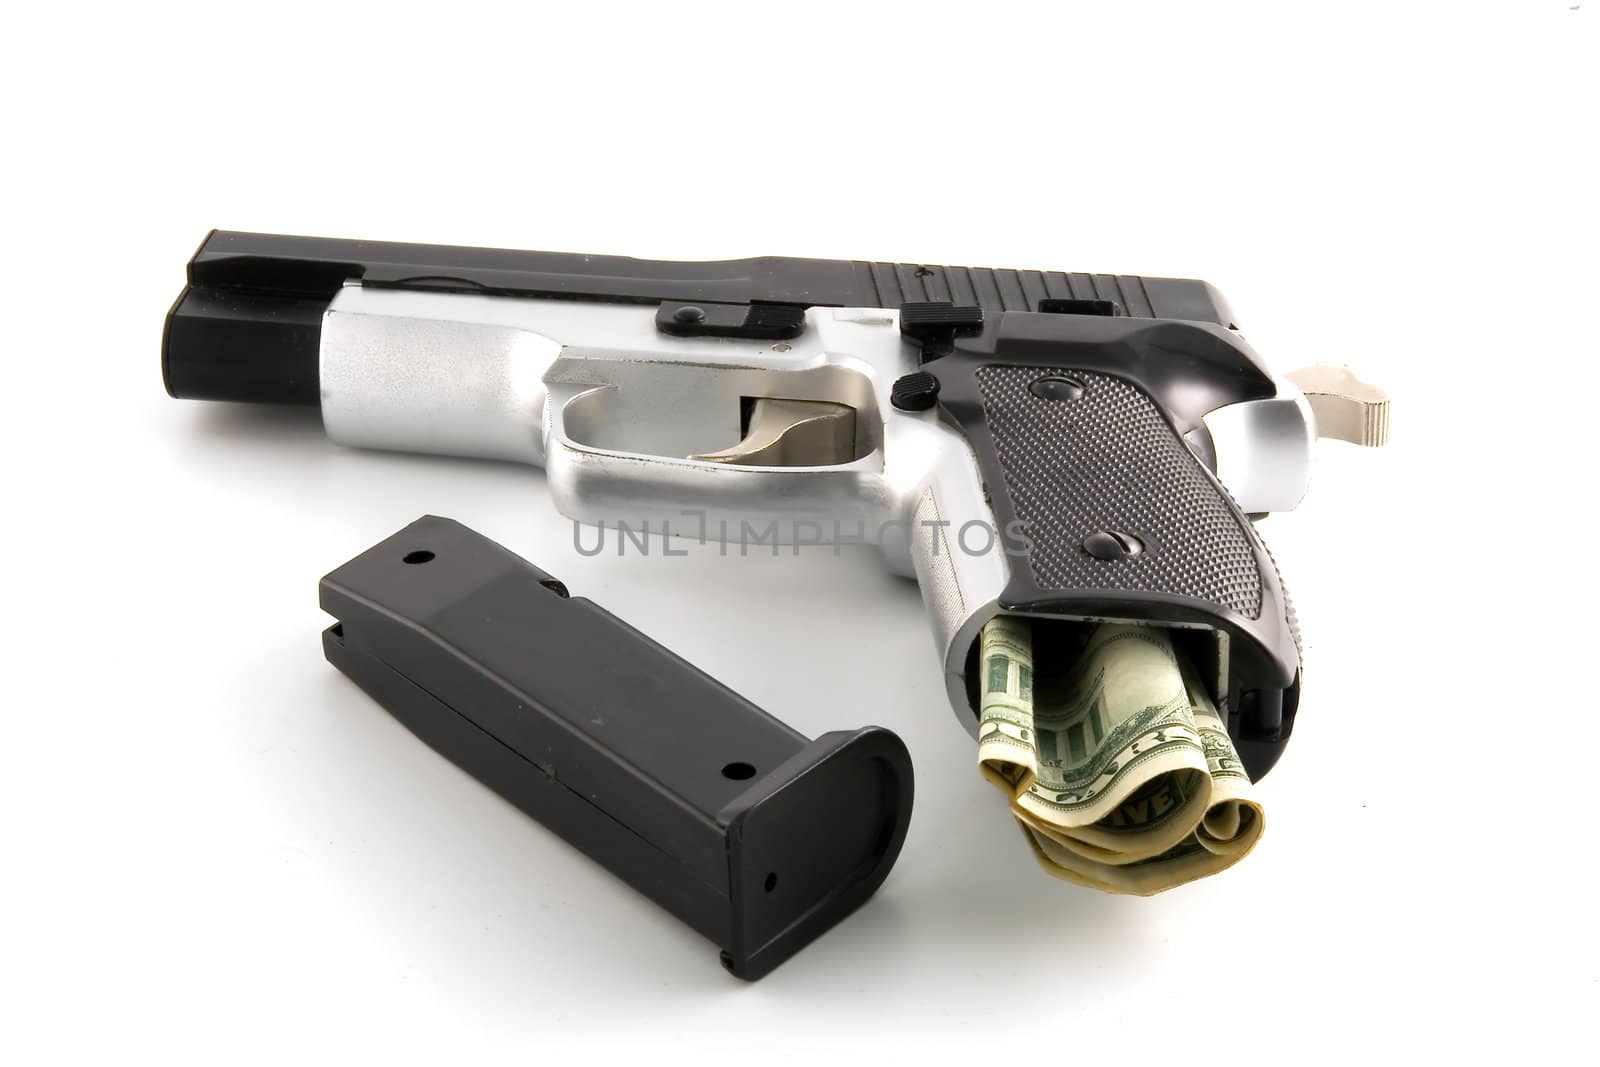 The pistol loaded by dollars by Vladimir